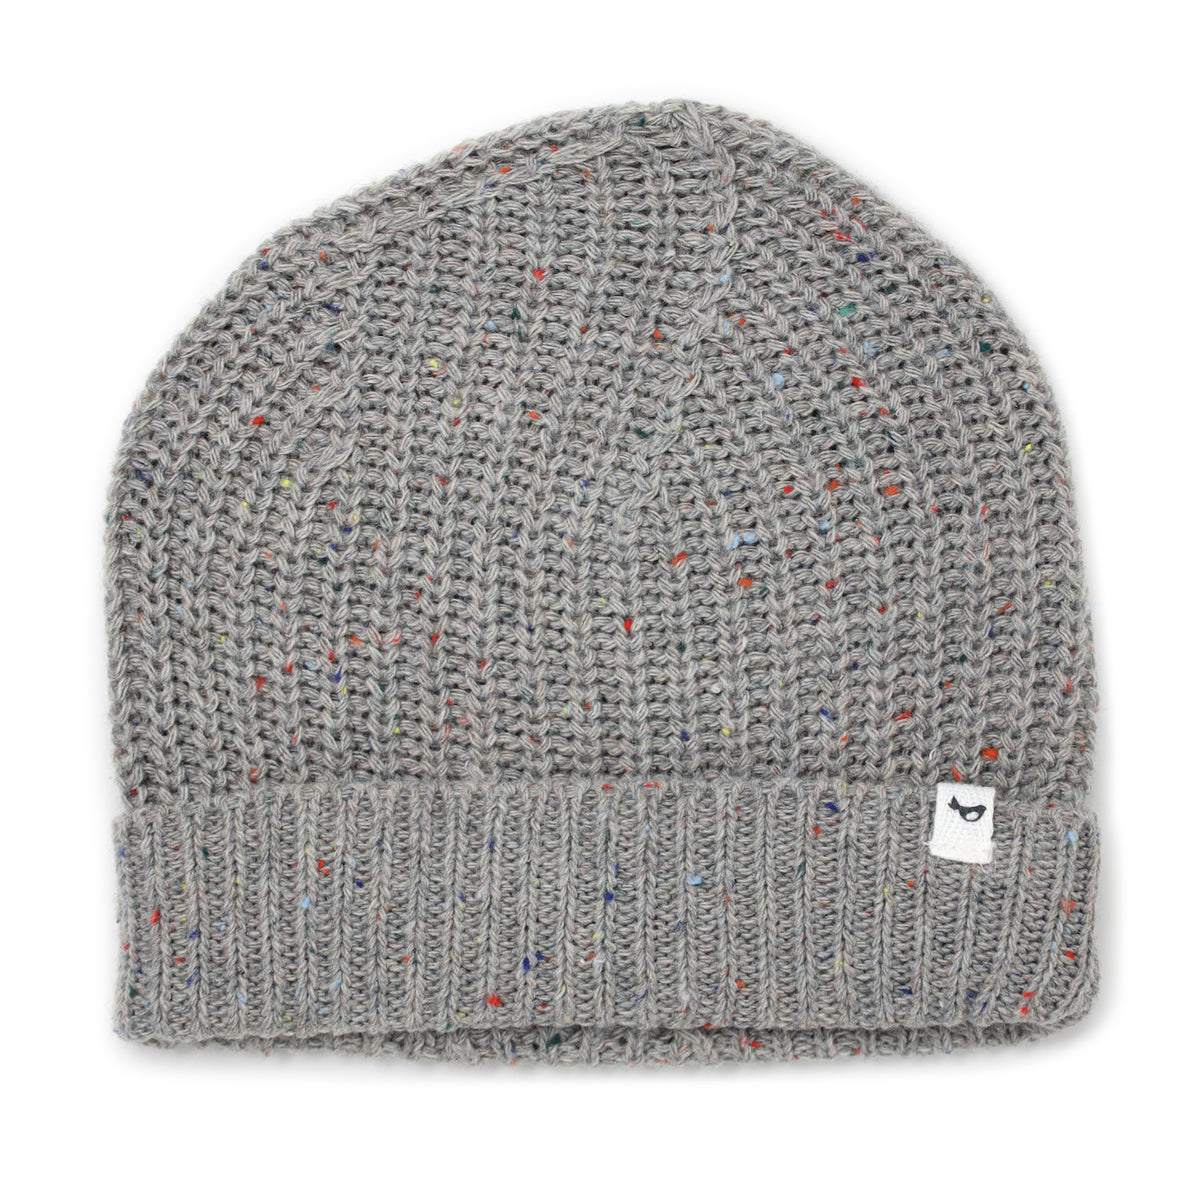 oh baby! Knitted Watchcap Hat - Charcoal Confetti